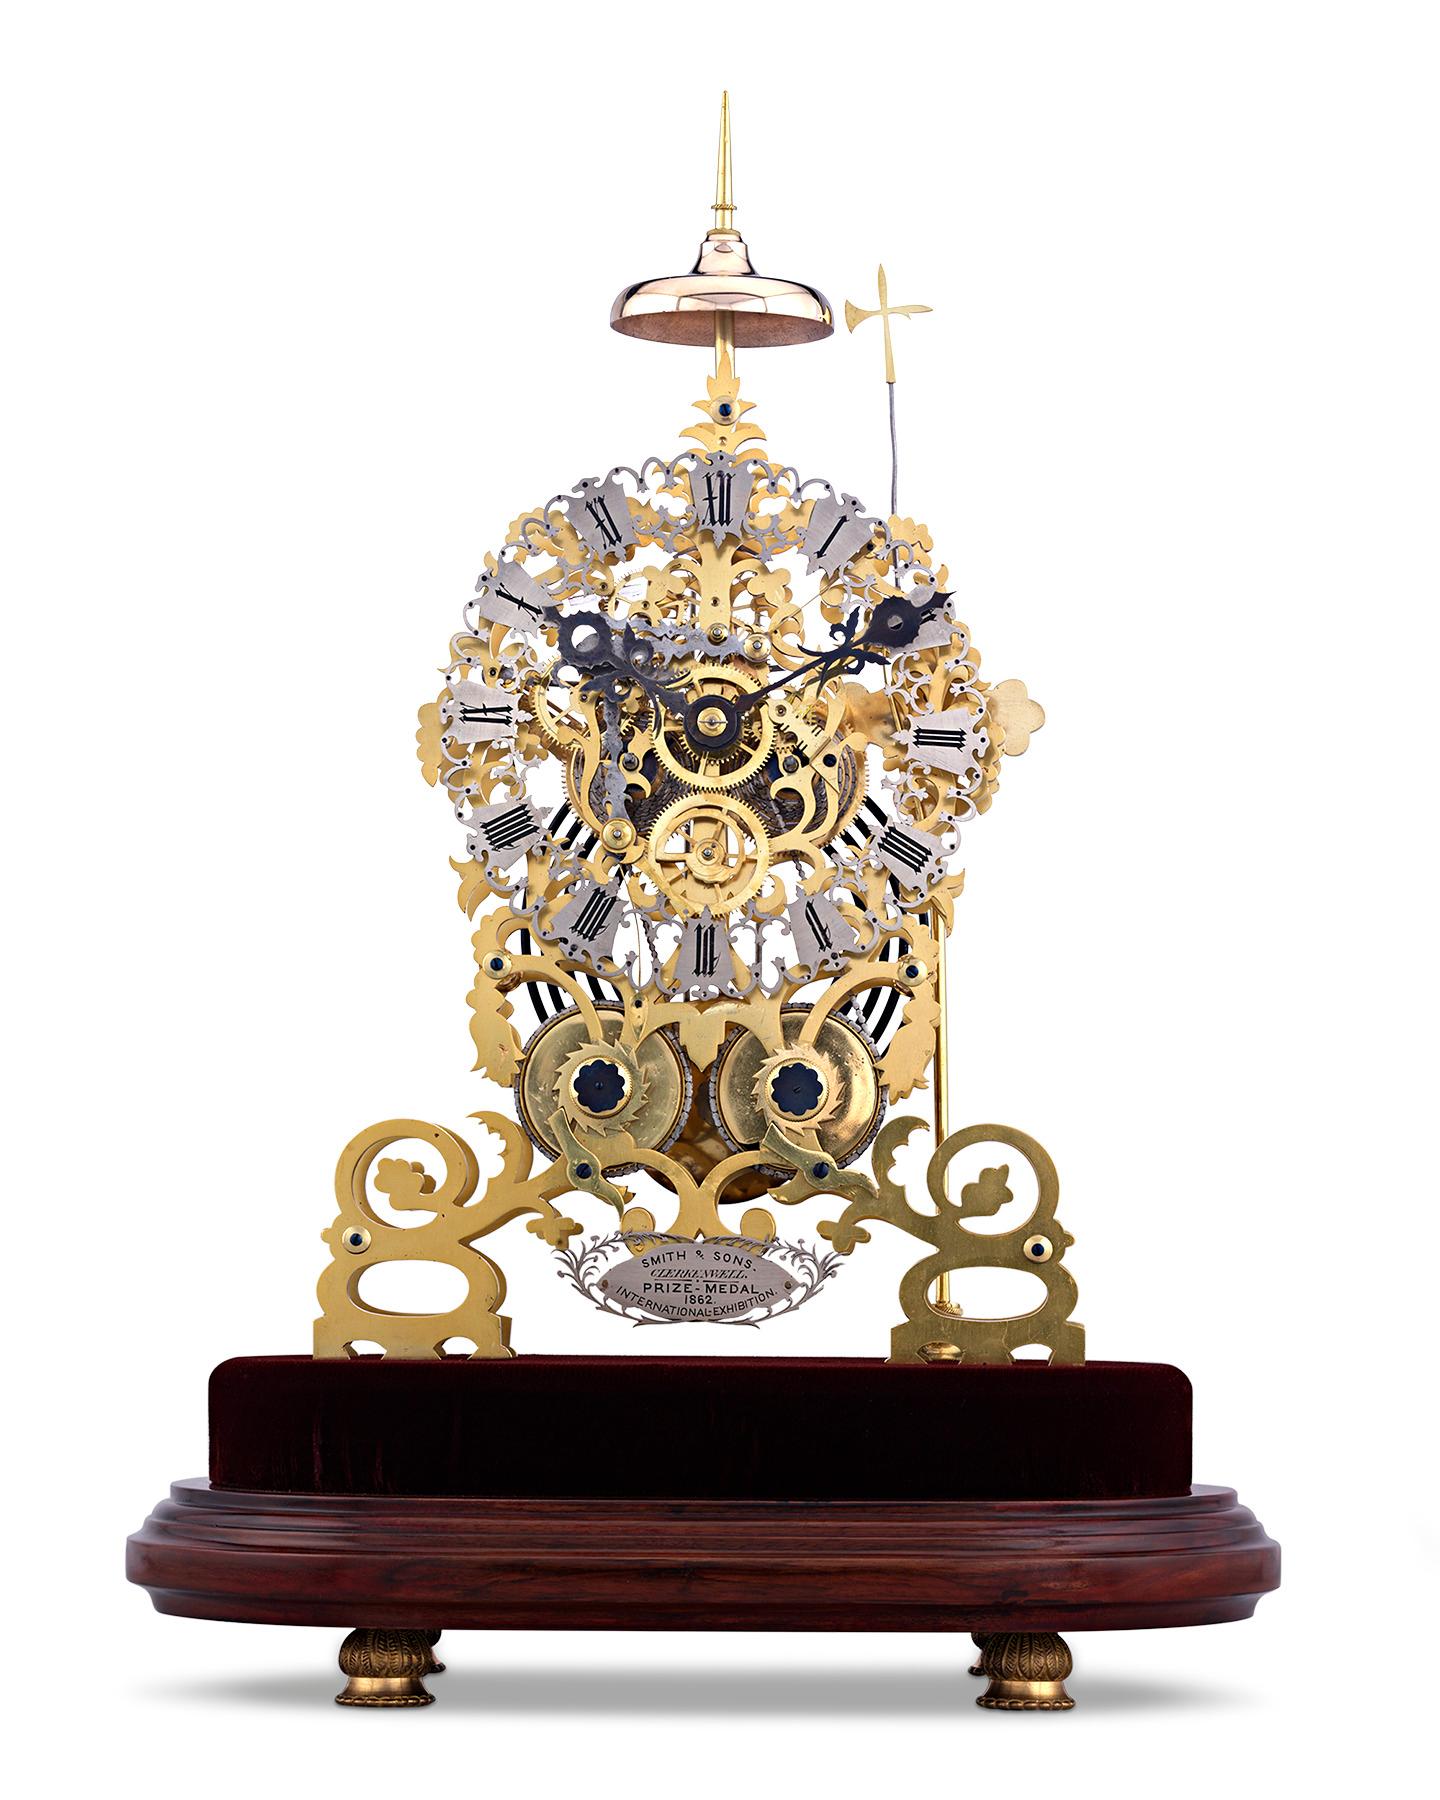 This exceptionally rare and early skeleton clock is a work of true horological mastery. Crafted by J. Smith & Sons of Clerkenwell, the impressive timepiece was prominently displayed at the 1862 International Exhibition in London, where the firm was